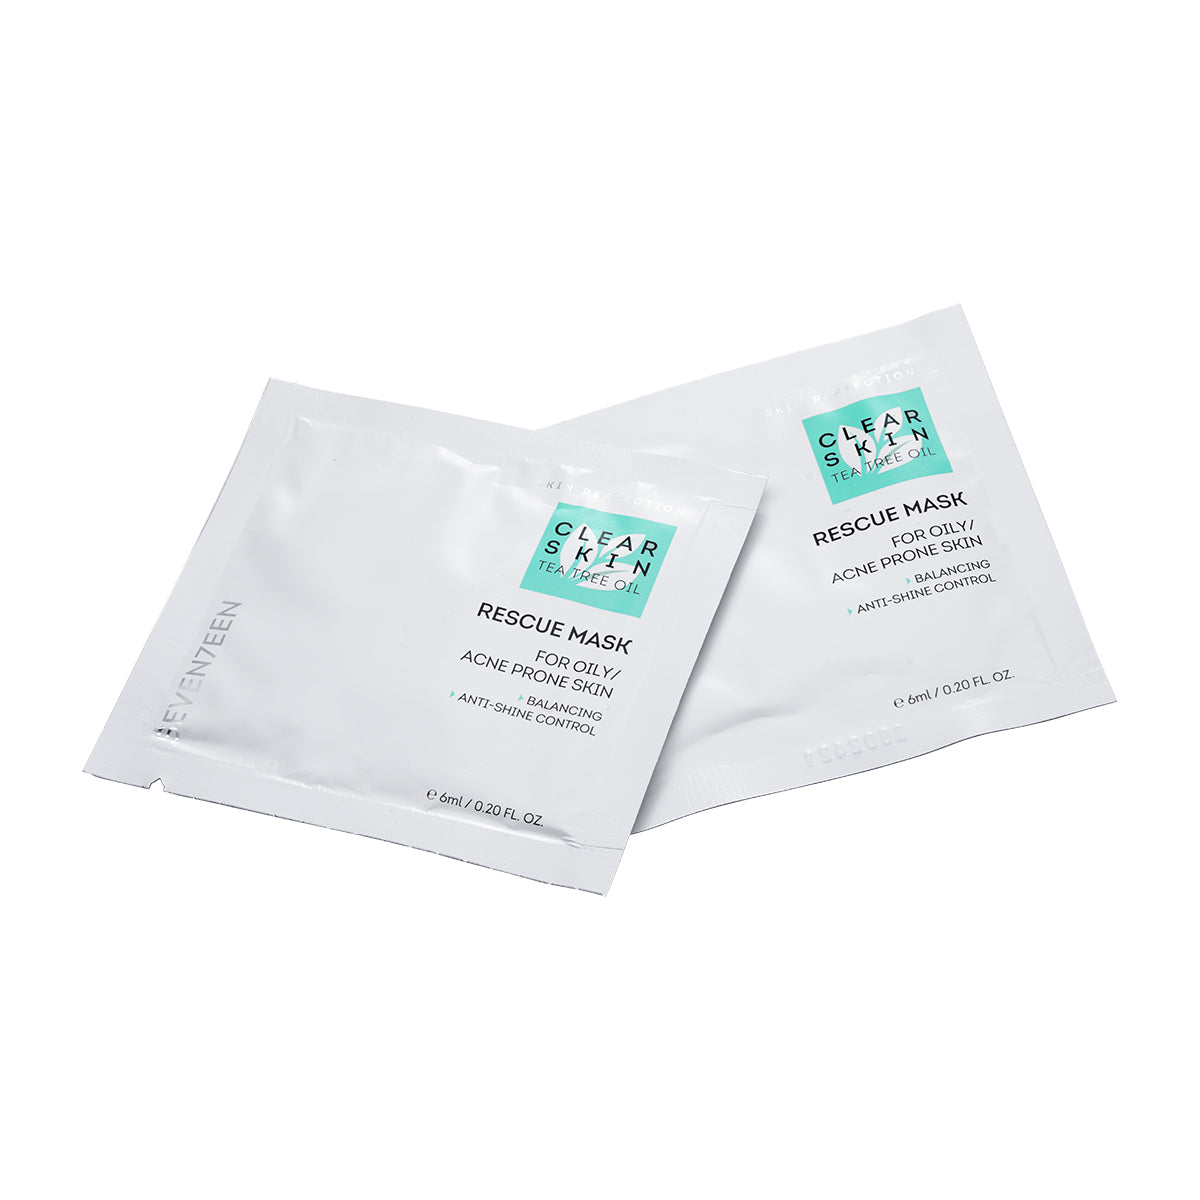 Seventeen Clear Skin Rescue Mask Double Pouch